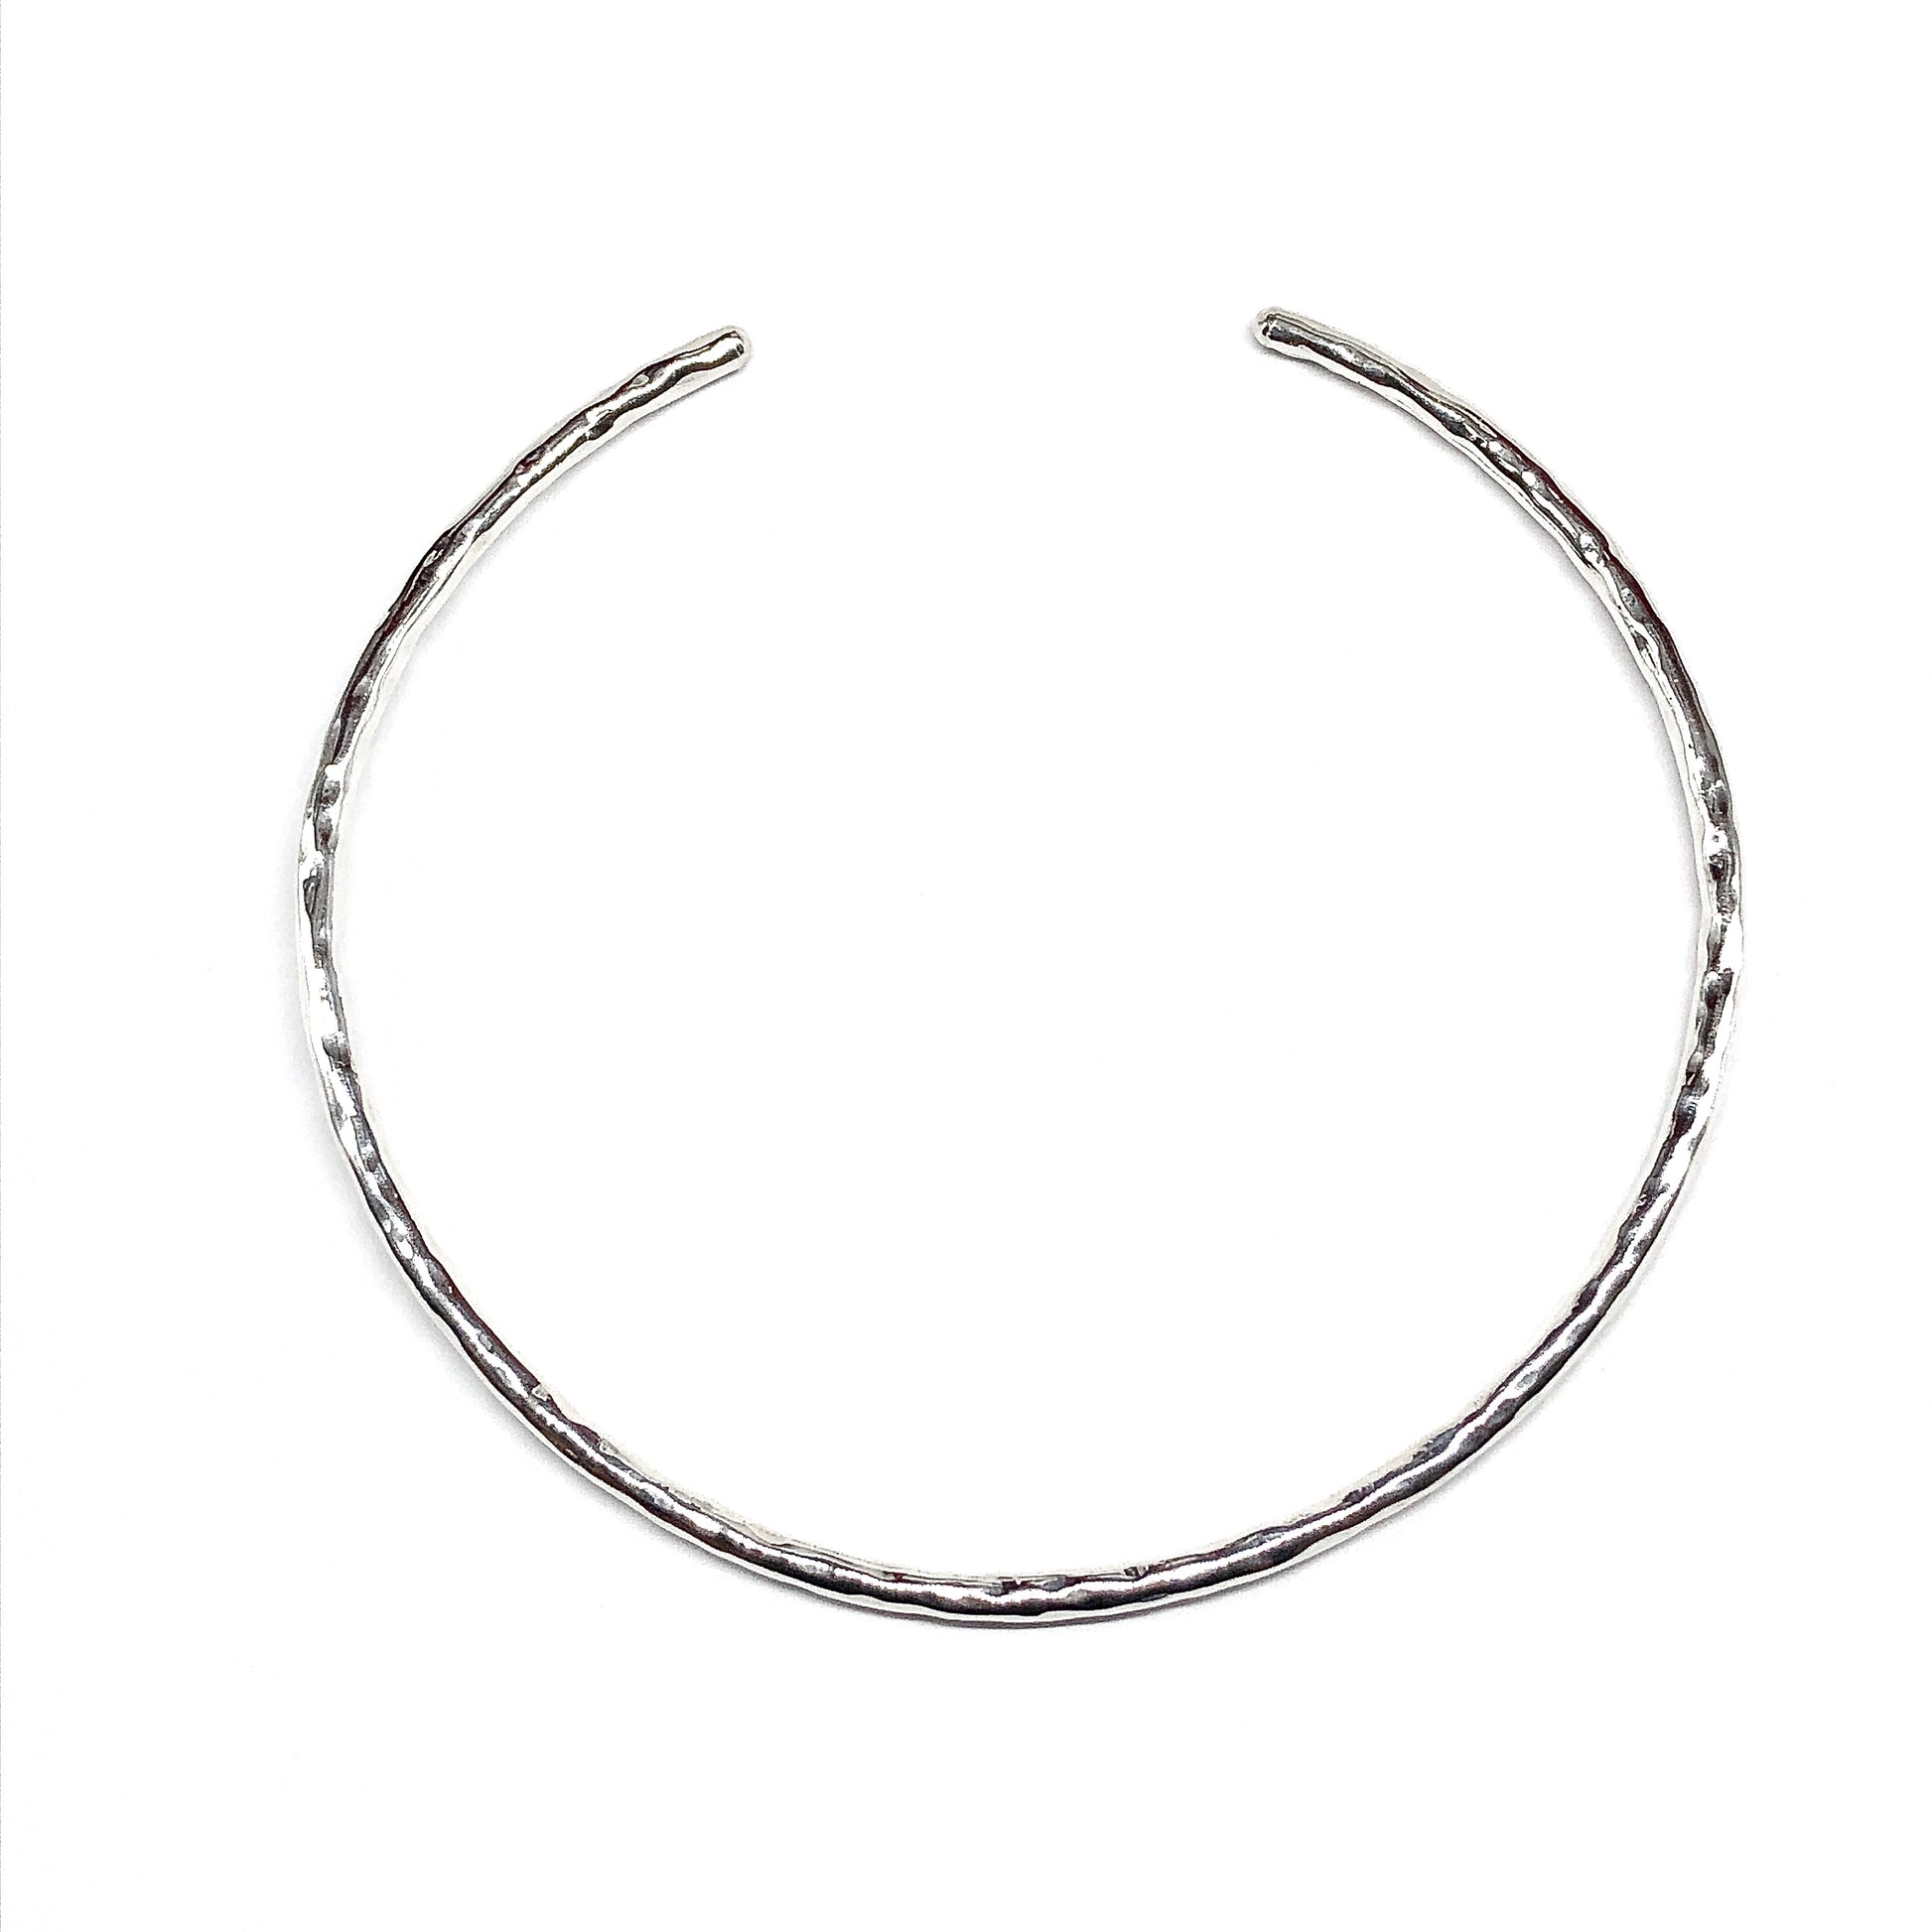 Necklace - Hammered Bangle Style Choker - Sterling Silver Collar Necklace - Womens Estate 16 inch Choker Necklace